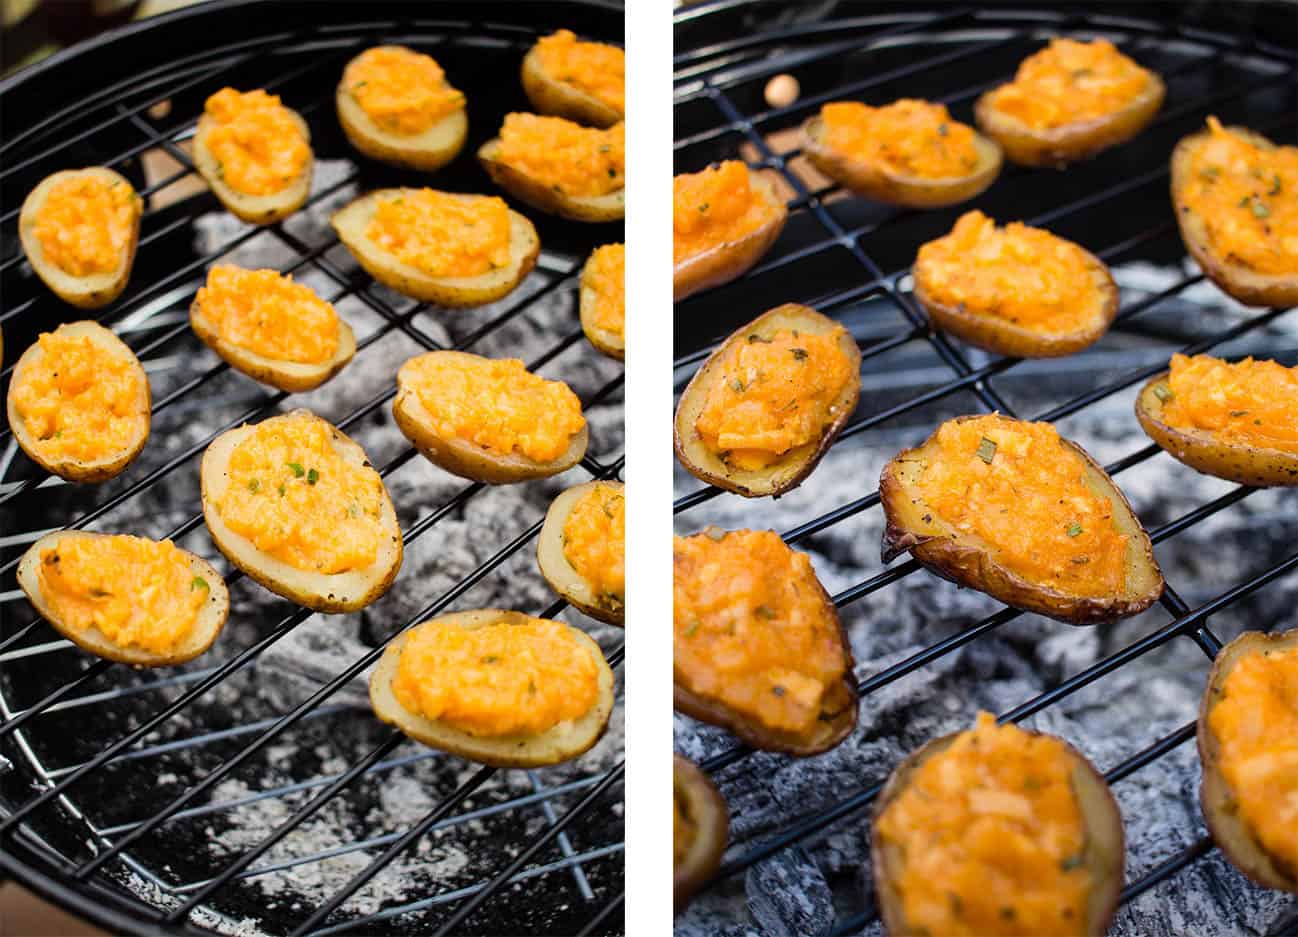 Left: Vegan Double-Stuffed Buffalo Ranch Potatoes just placed on a charcoal grill. Right: Vegan Double-Stuffed Buffalo Ranch Potatoes almost done cooking on a charcoal grill.